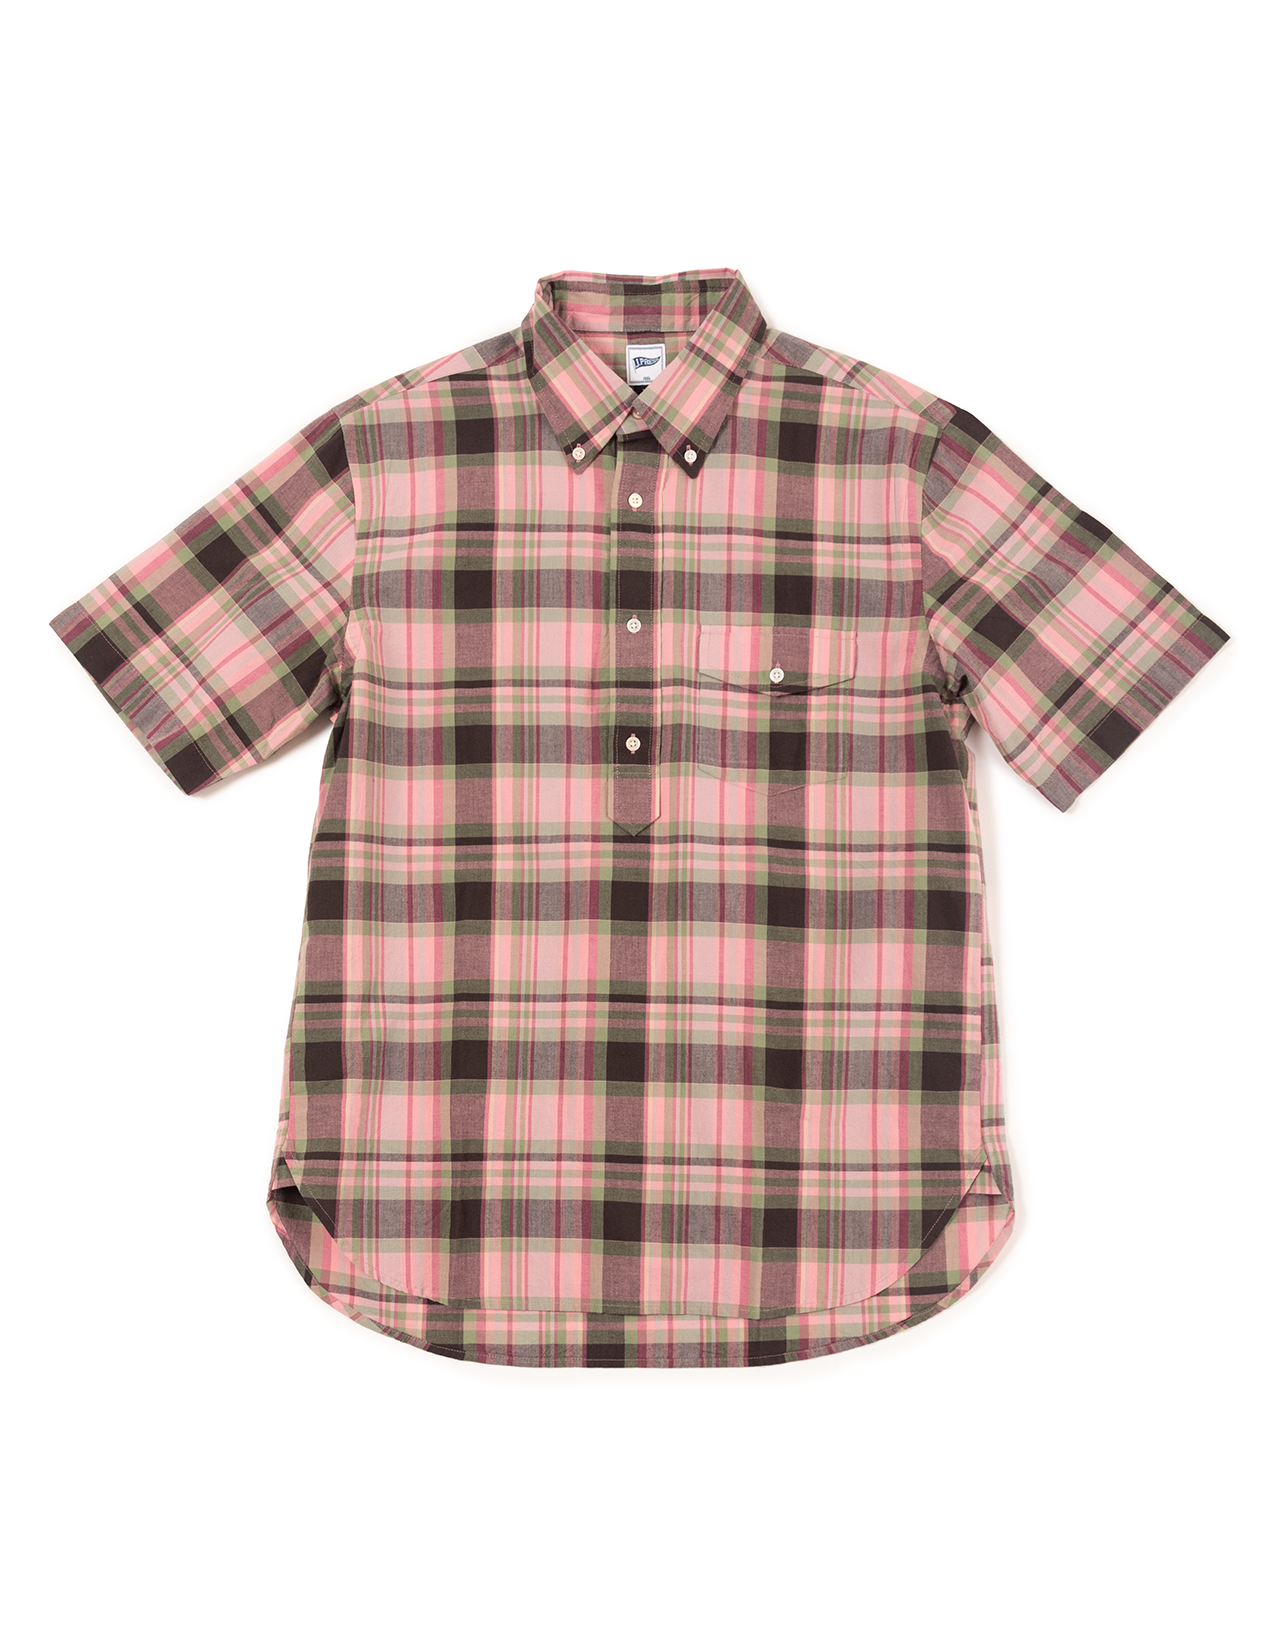 MADRAS POPOVER - PINK/GREEN/RED